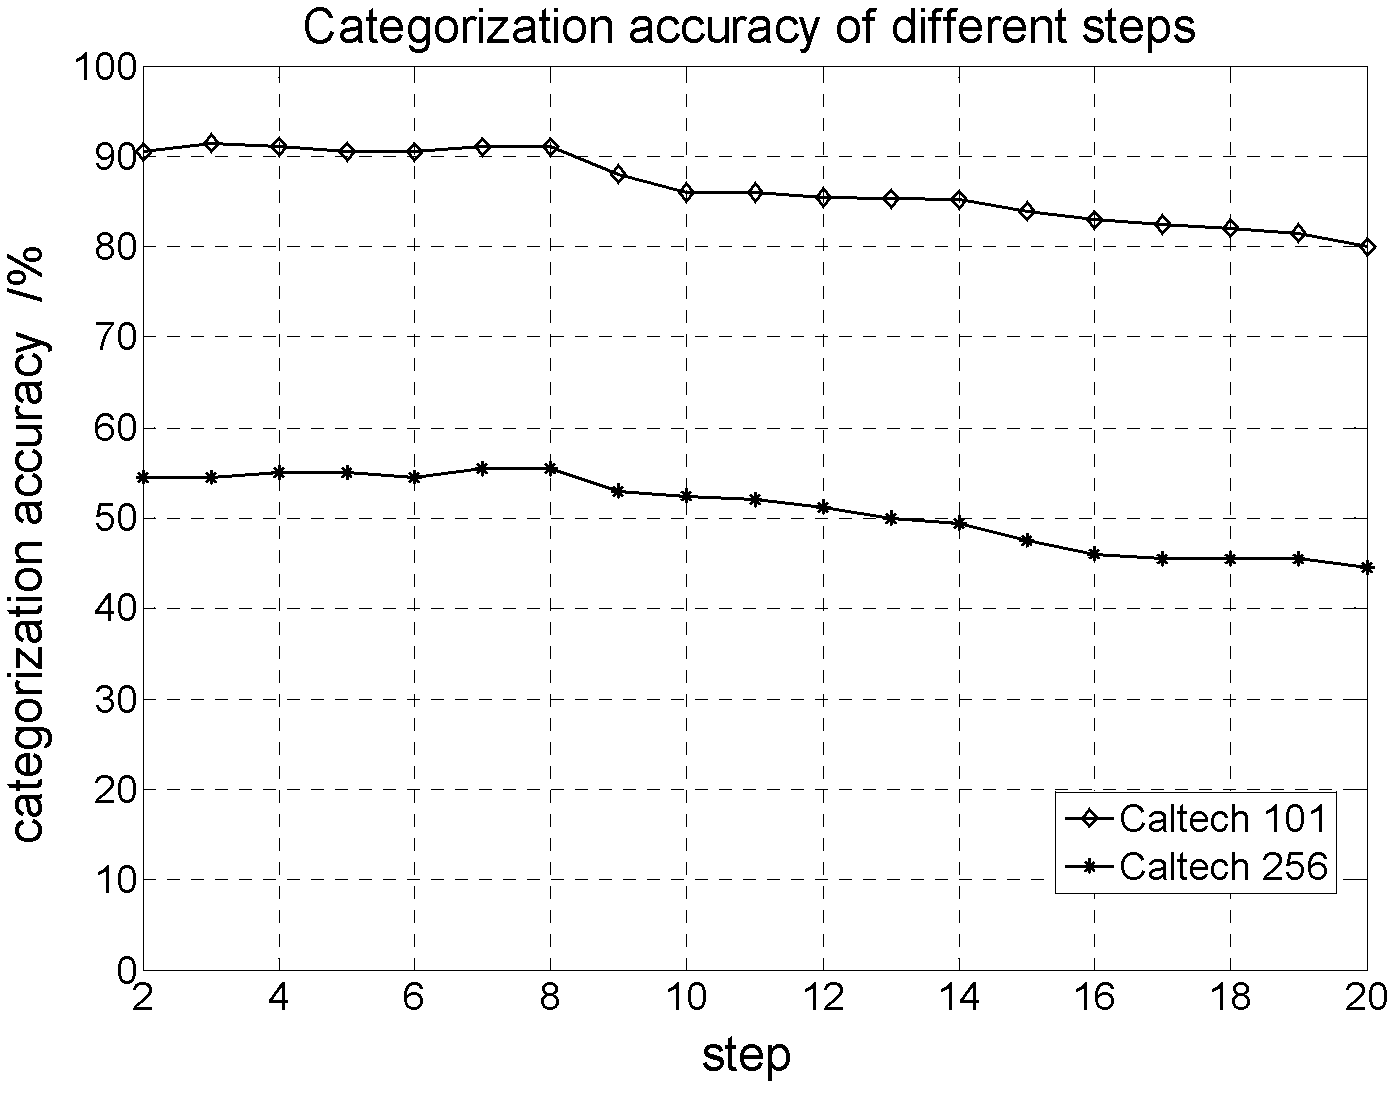 Image characteristic extracting and describing method